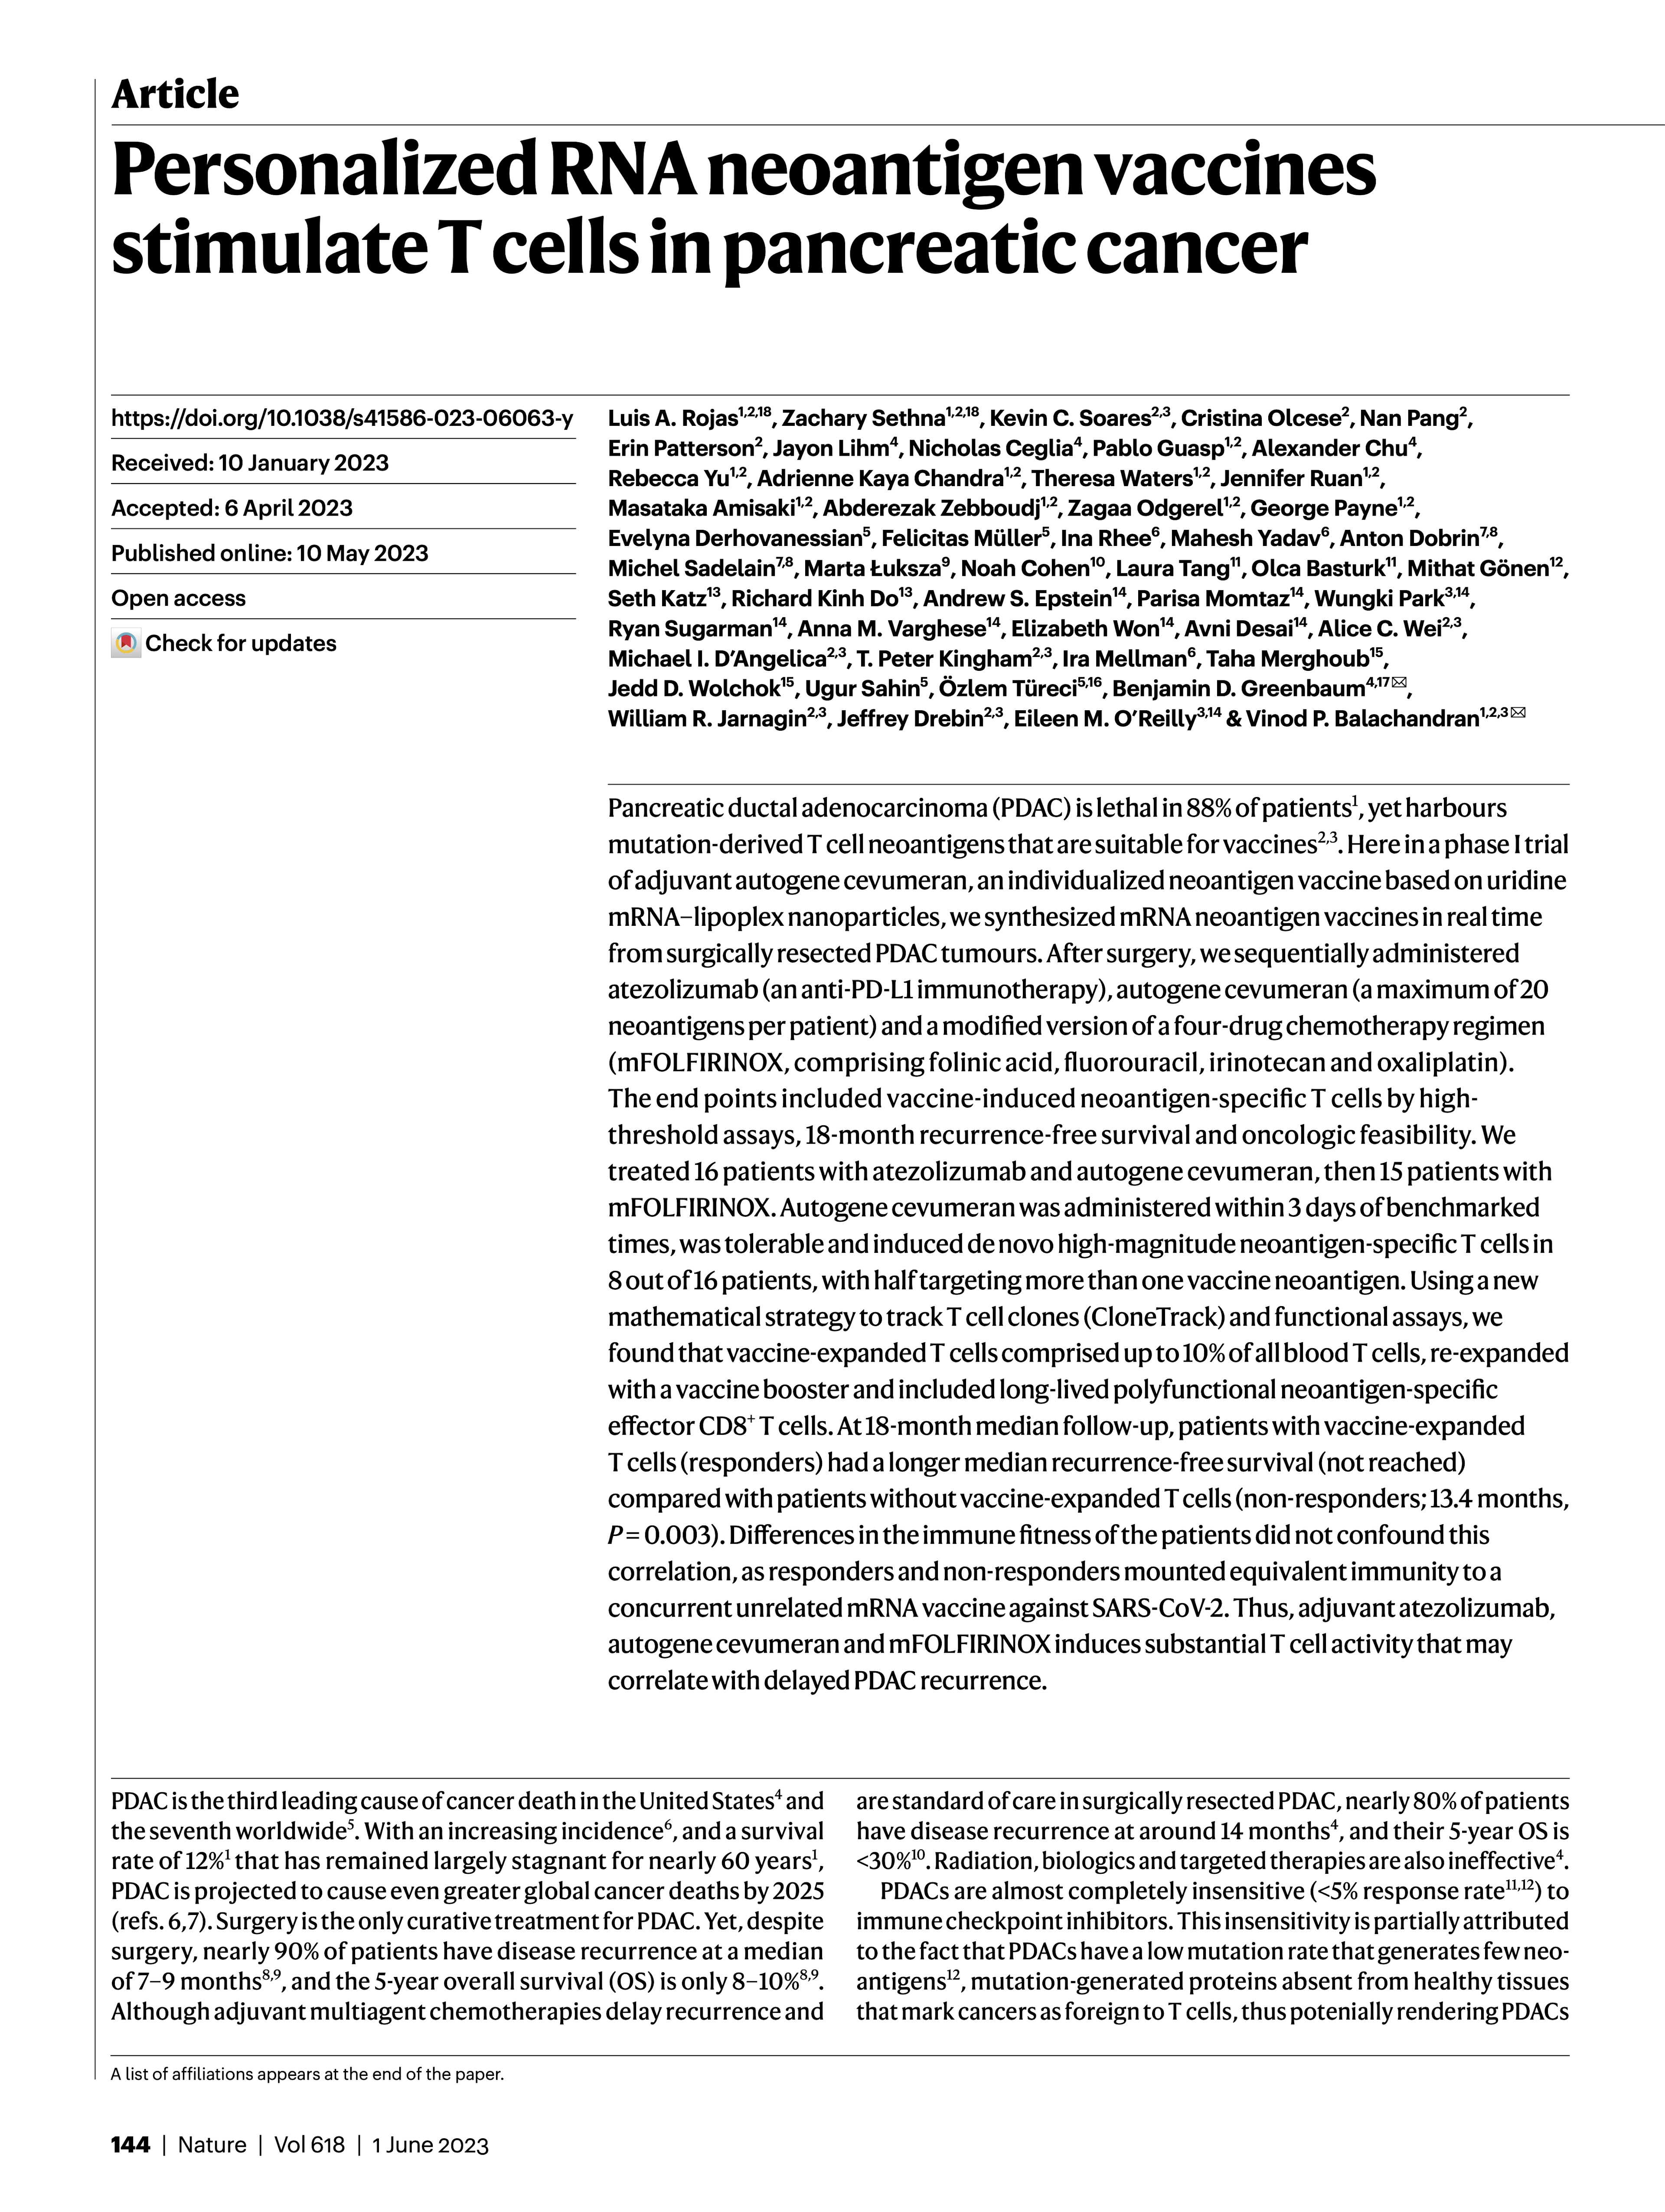 First page of Nature article on novel personalized neoantigen vaccines